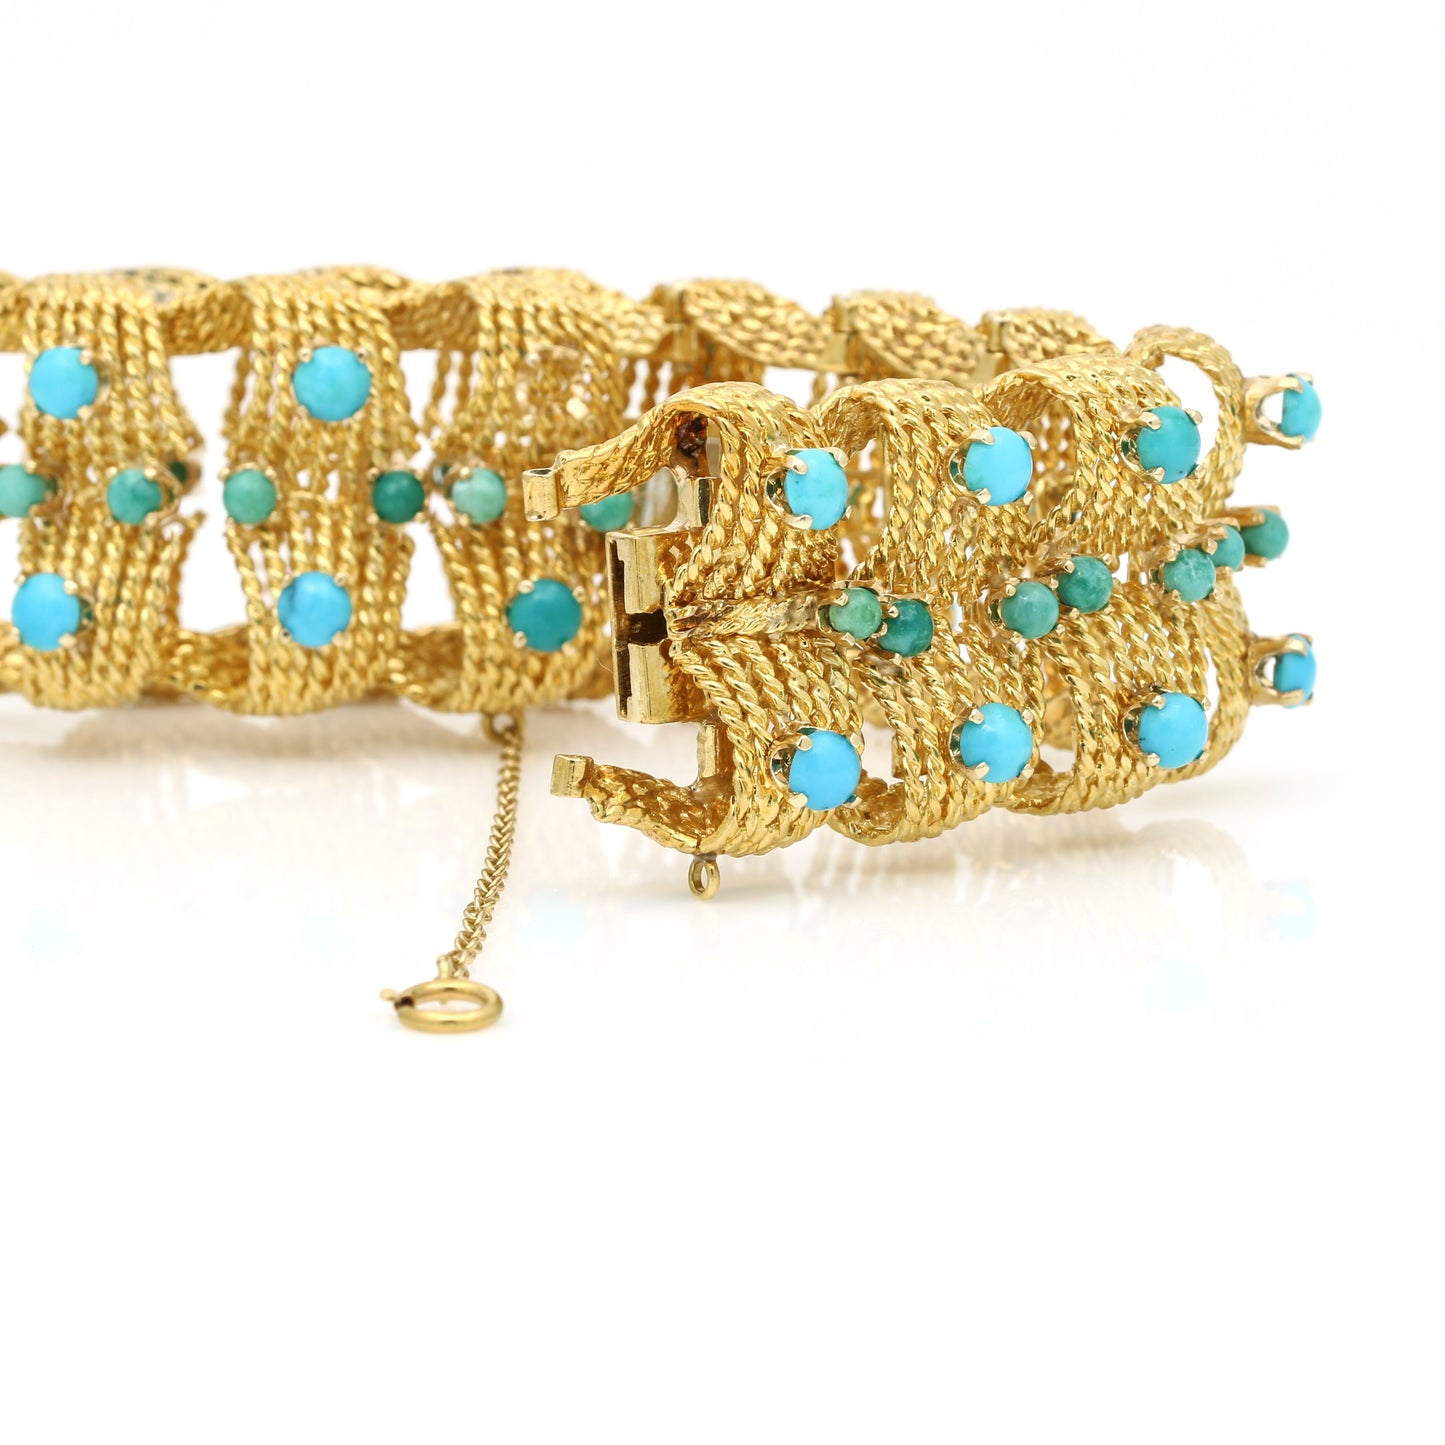 Mid-Century Statement Turquoise Link Bracelet - 18k Yellow Gold | Size Small